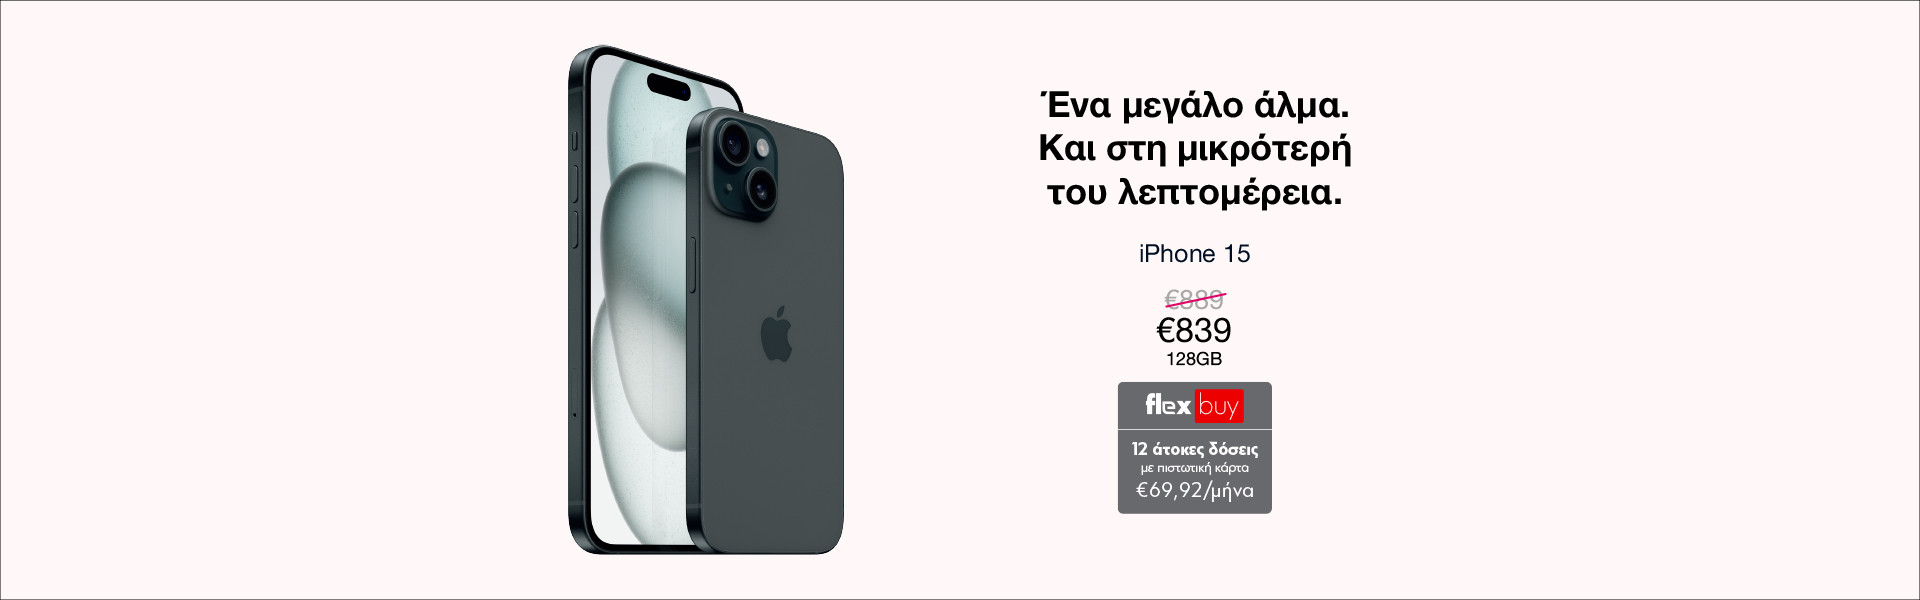 Main Banner Apple iPhone 15 February Campaign